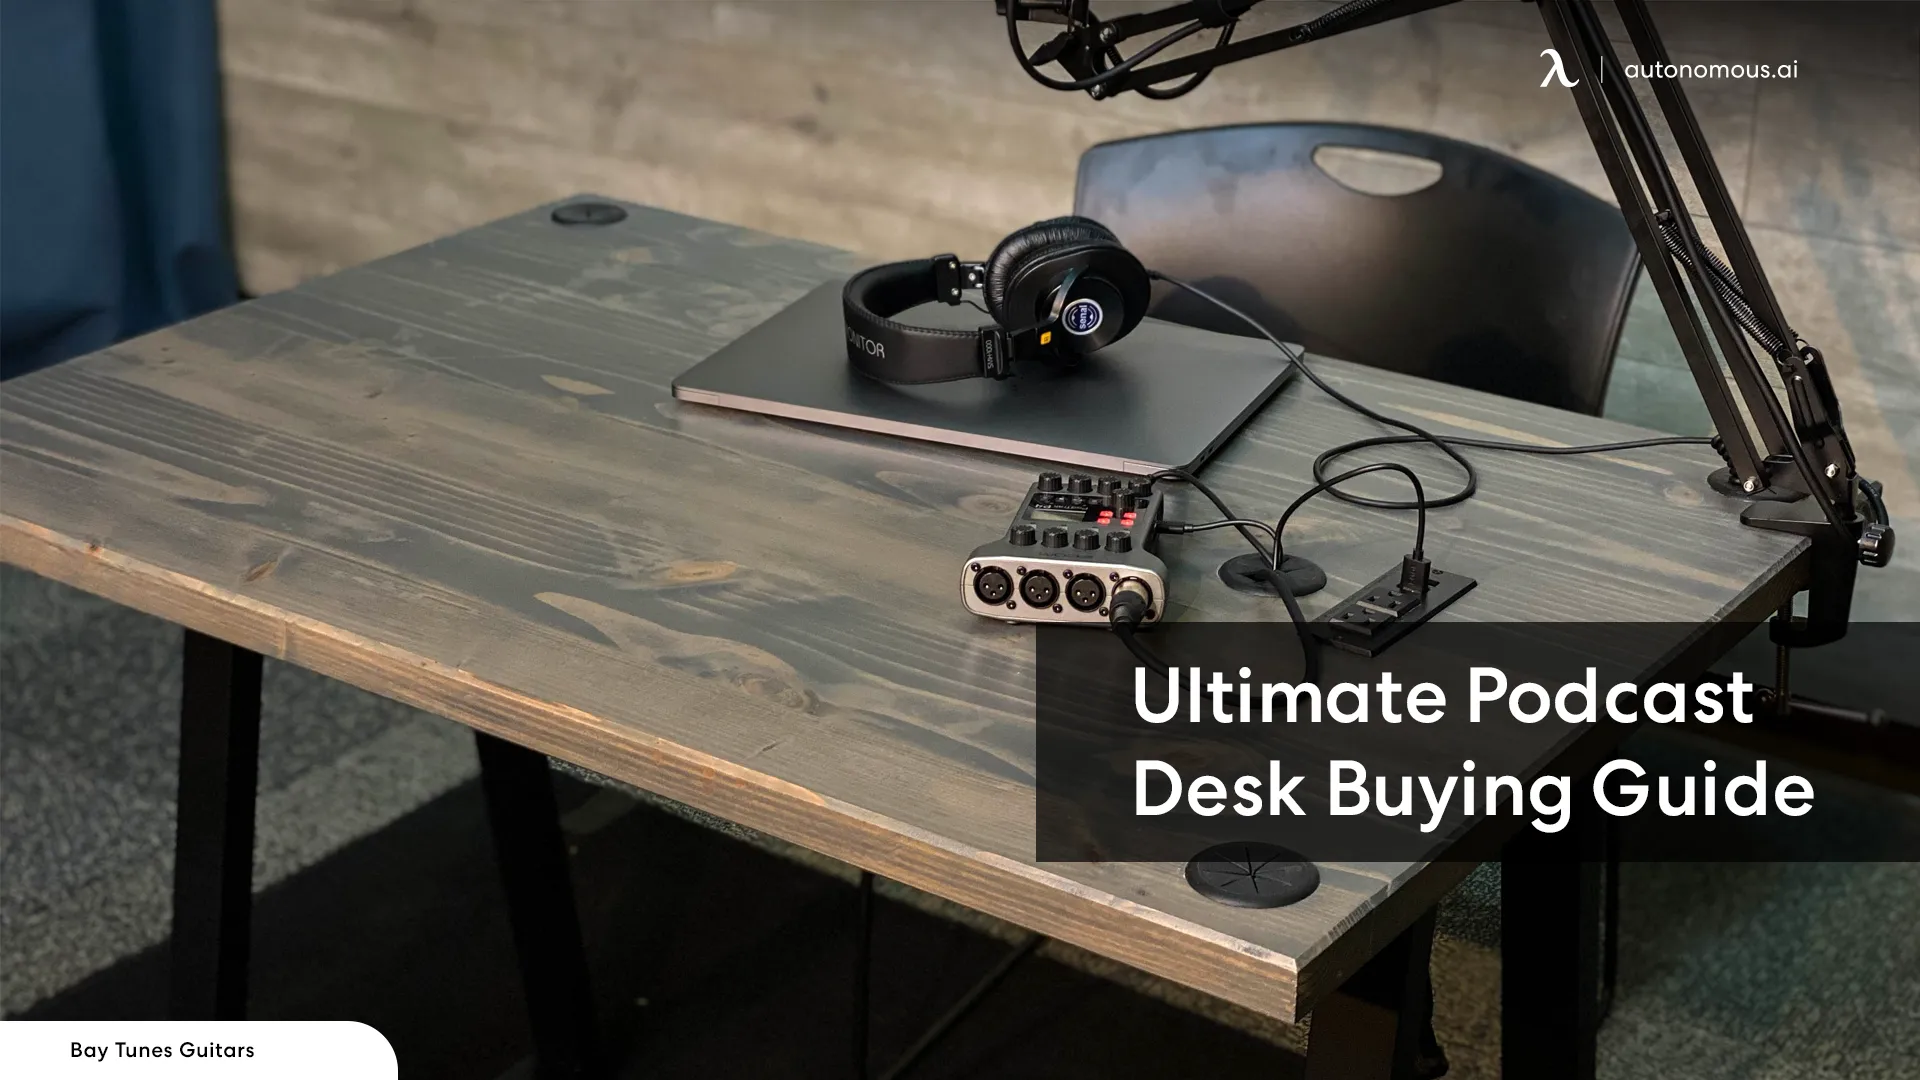 The Ultimate Guide to Selecting the Ideal Podcast Desk